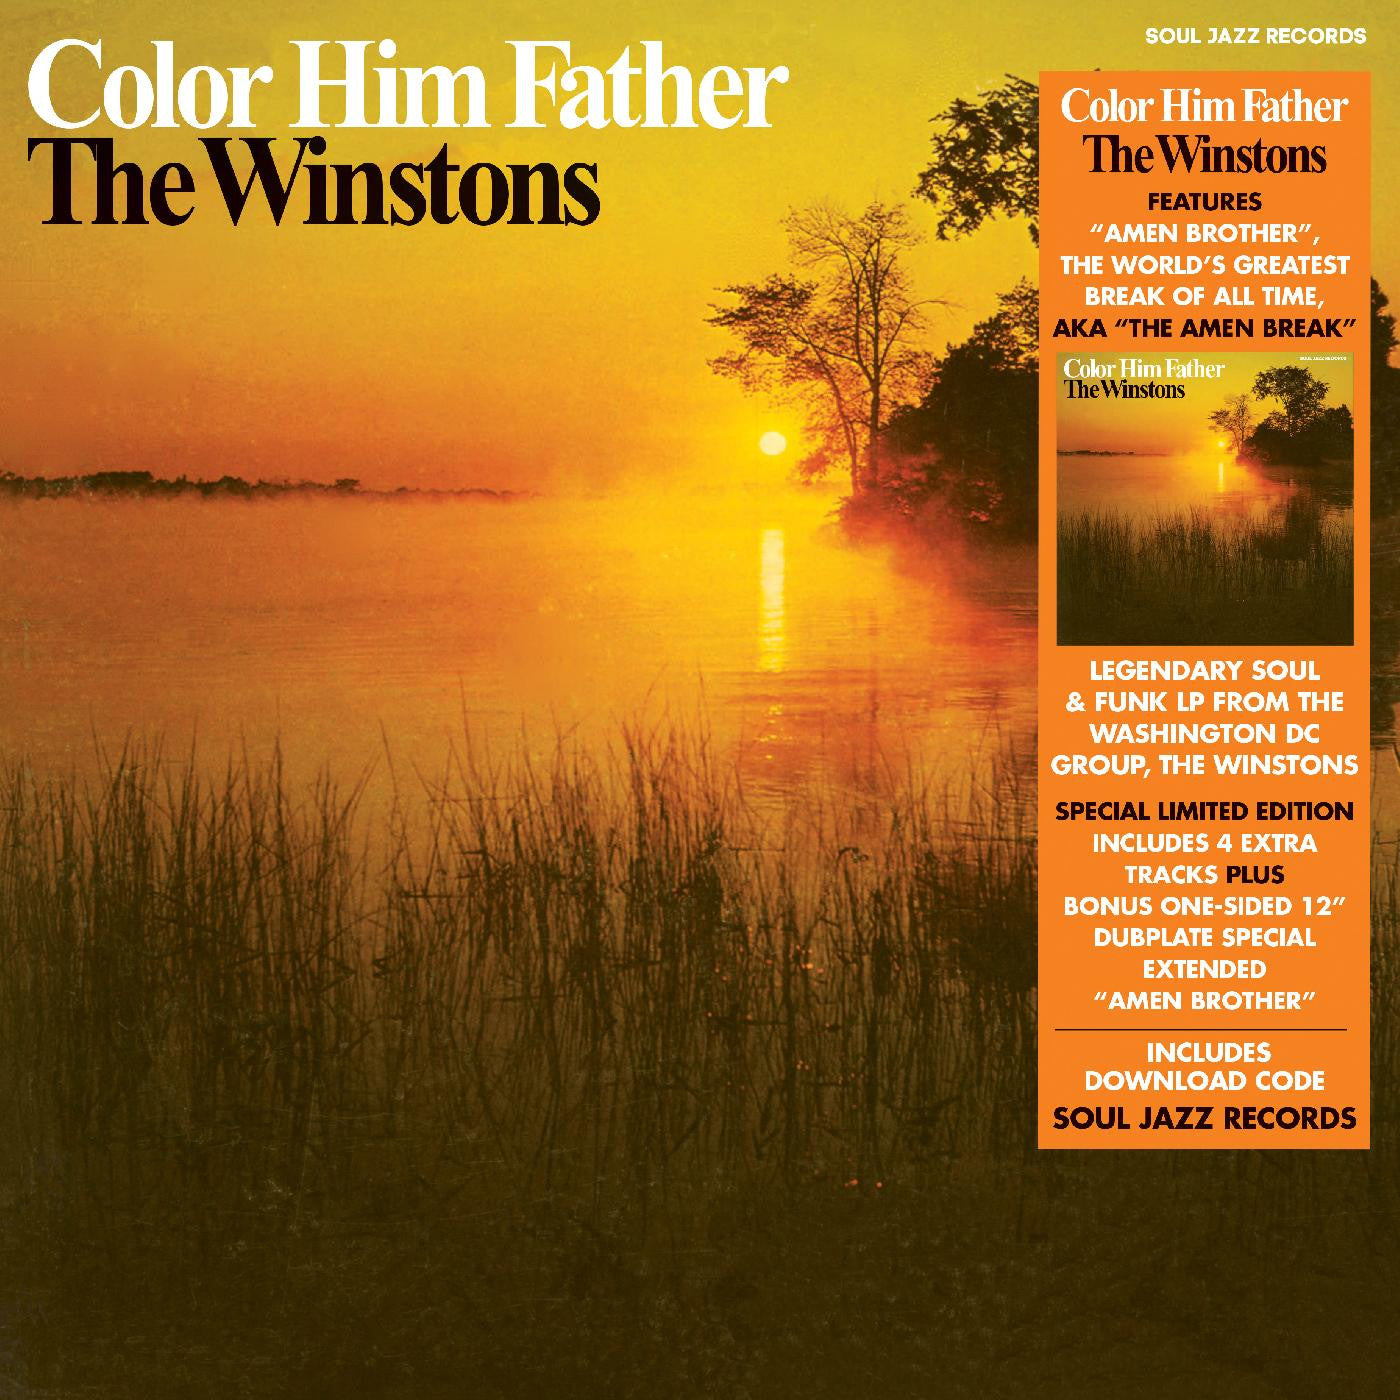 The Winstons - Color Him Father LP + 12”